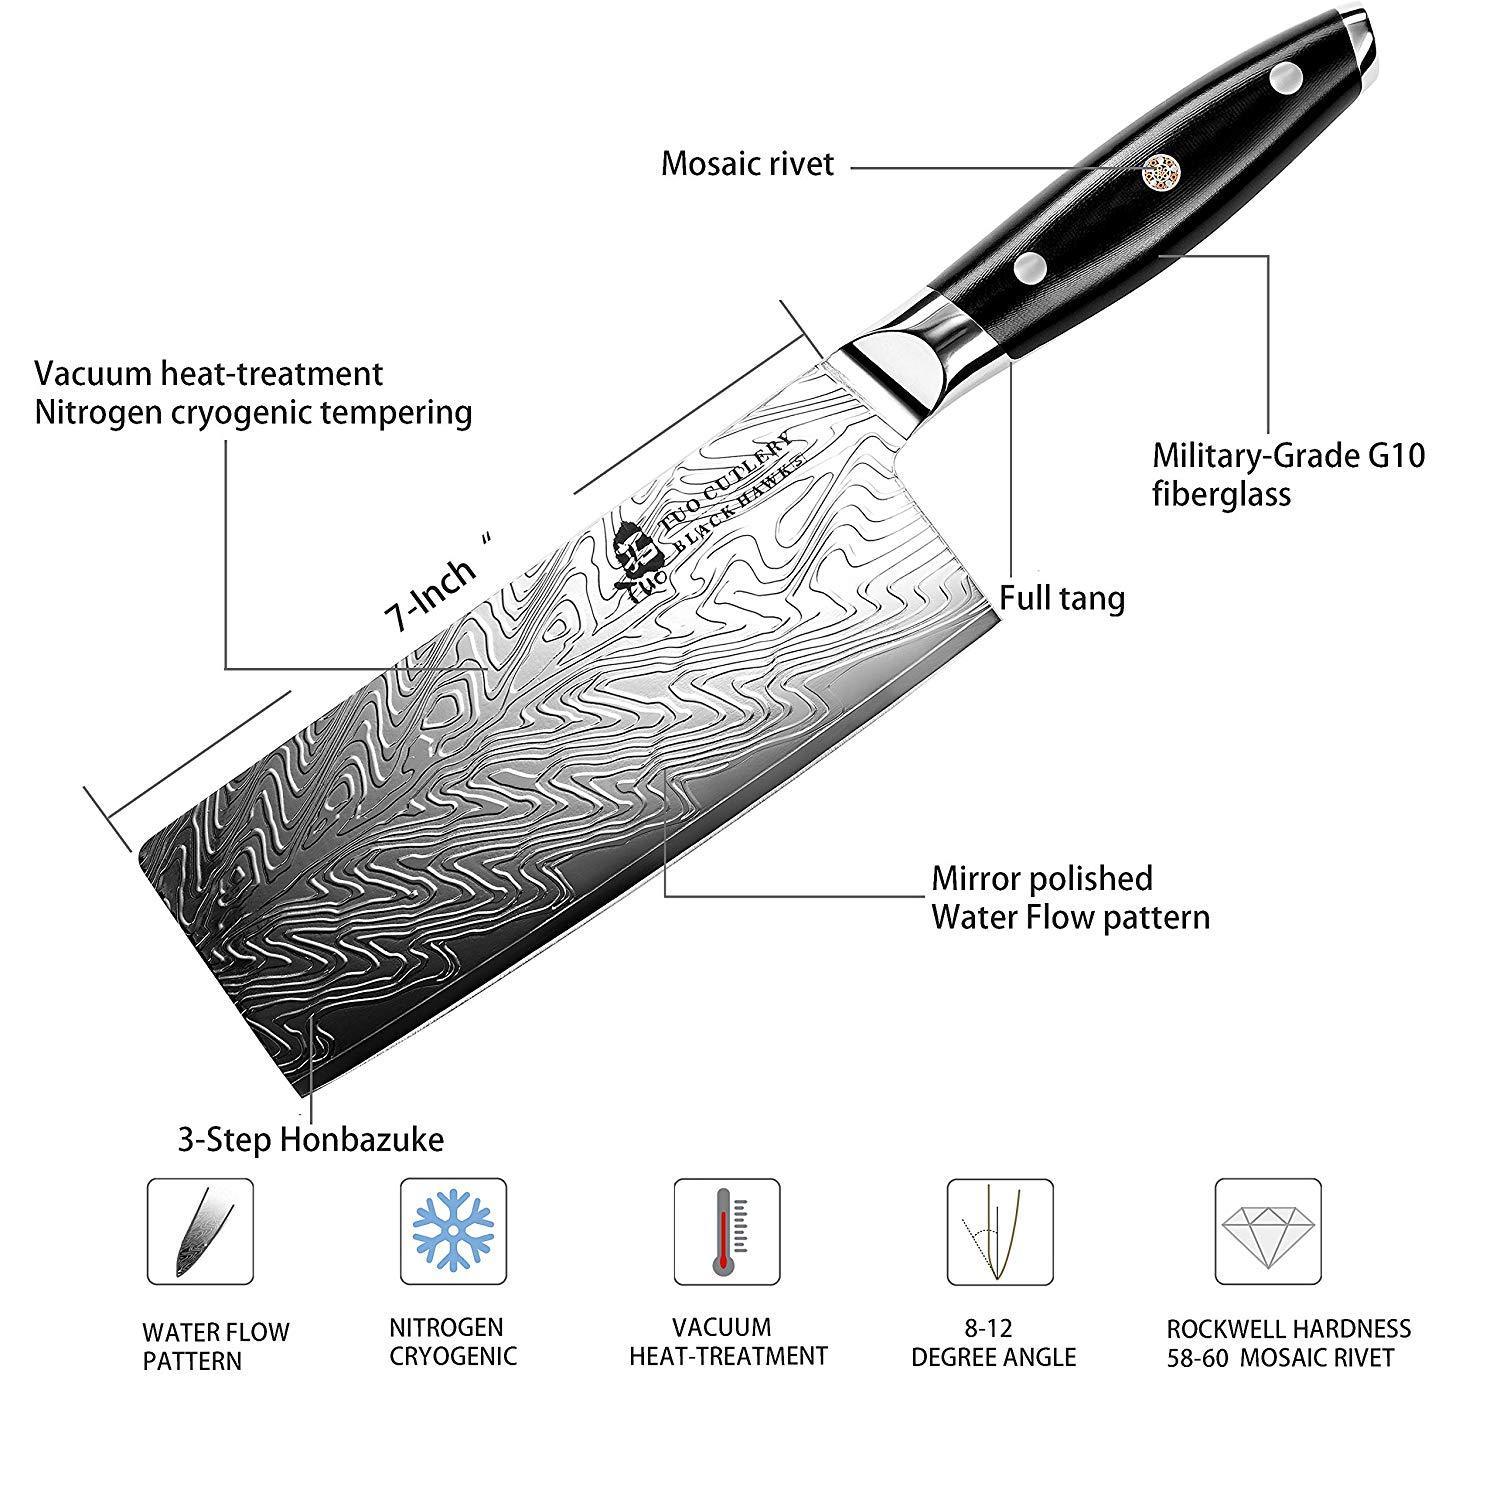 Meat Cleaver - Chef Knife